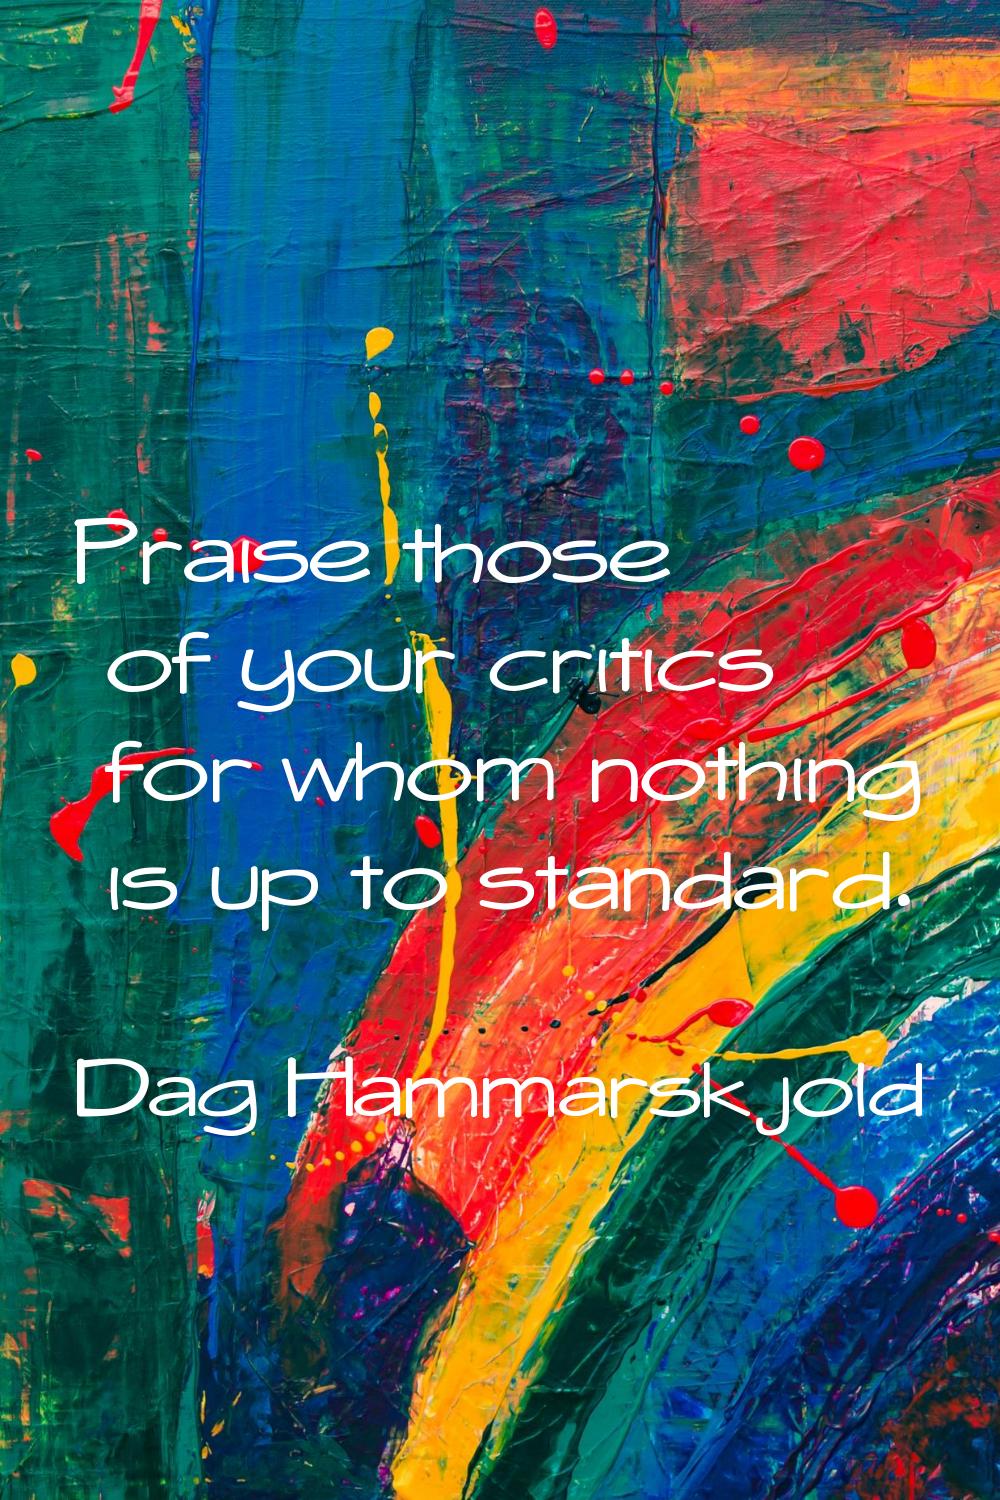 Praise those of your critics for whom nothing is up to standard.